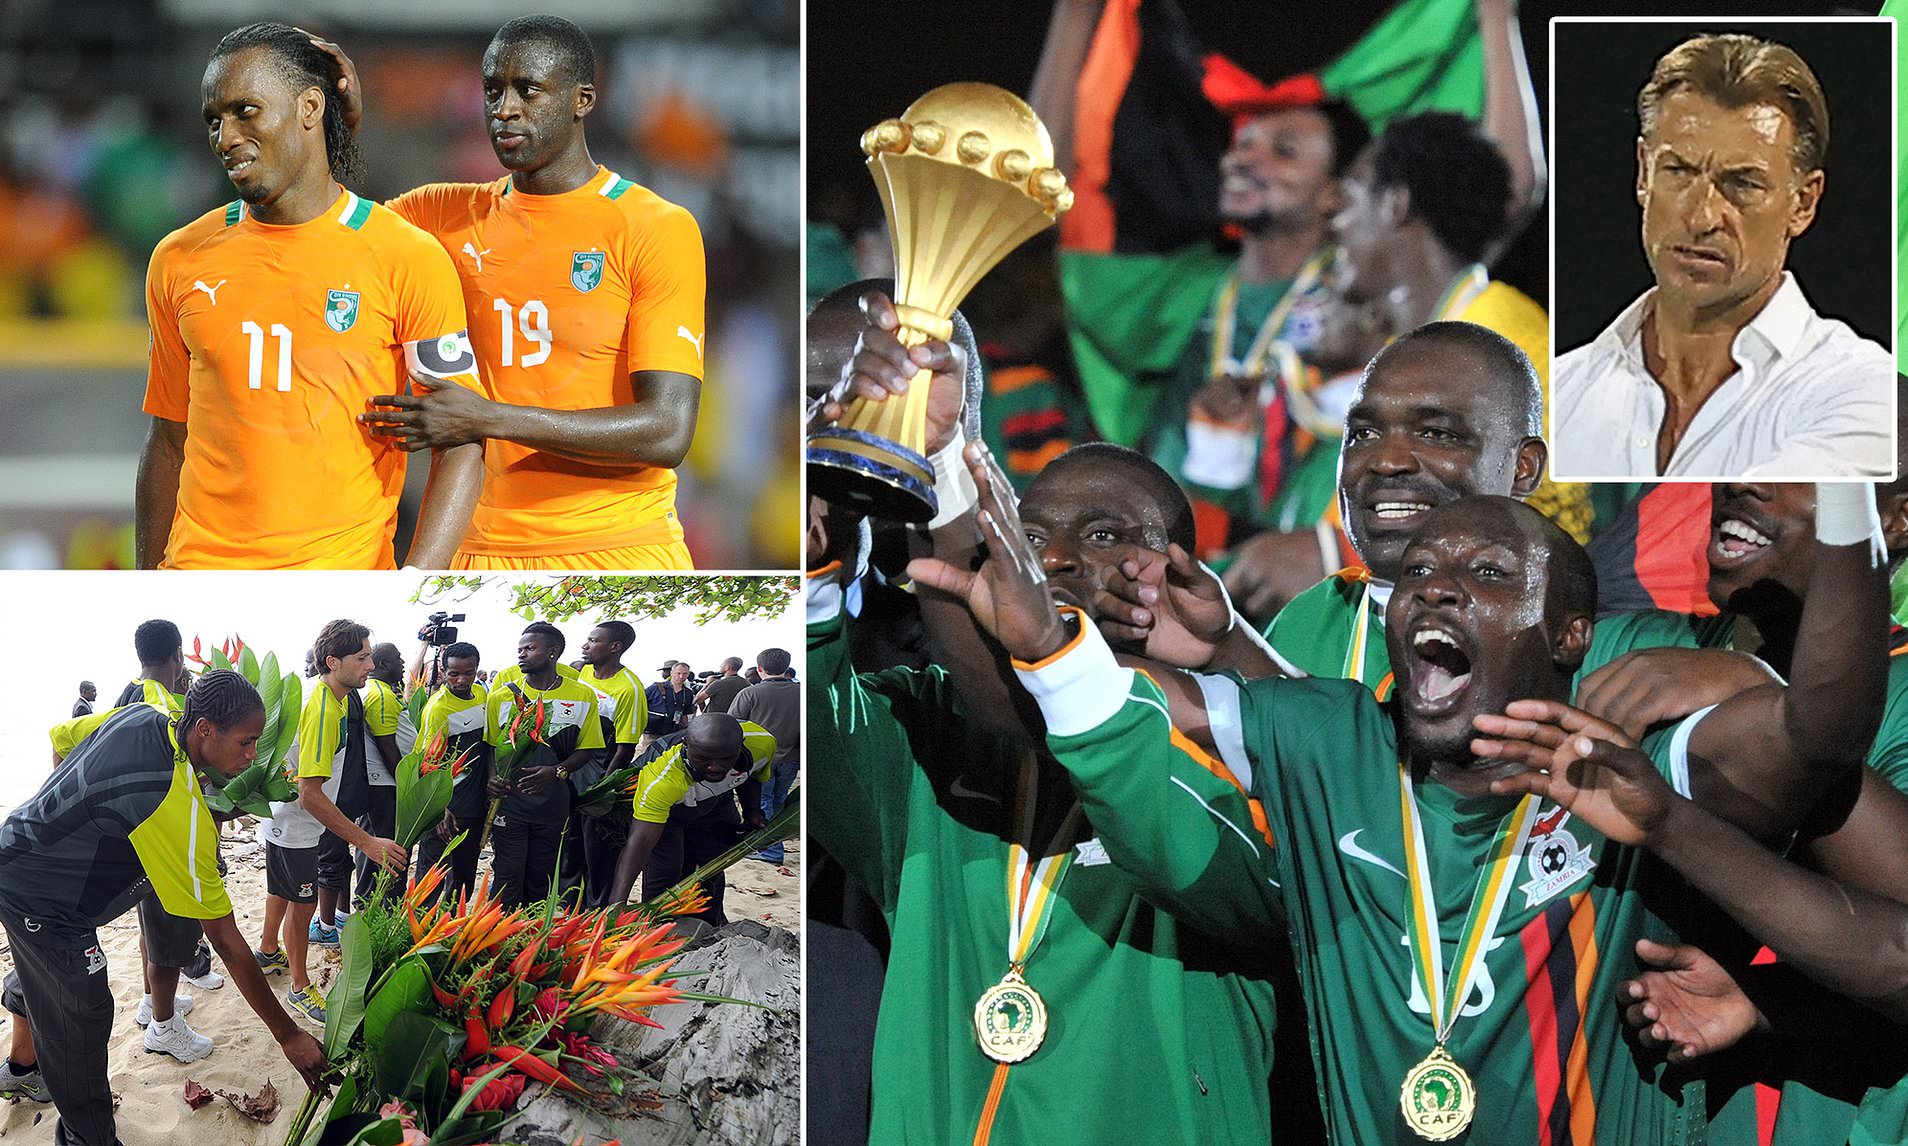 FORMER FAZ EXECUTIVE REVEALS THEY PAID 2012 AFCON WINNING PLAYERS PRIZE